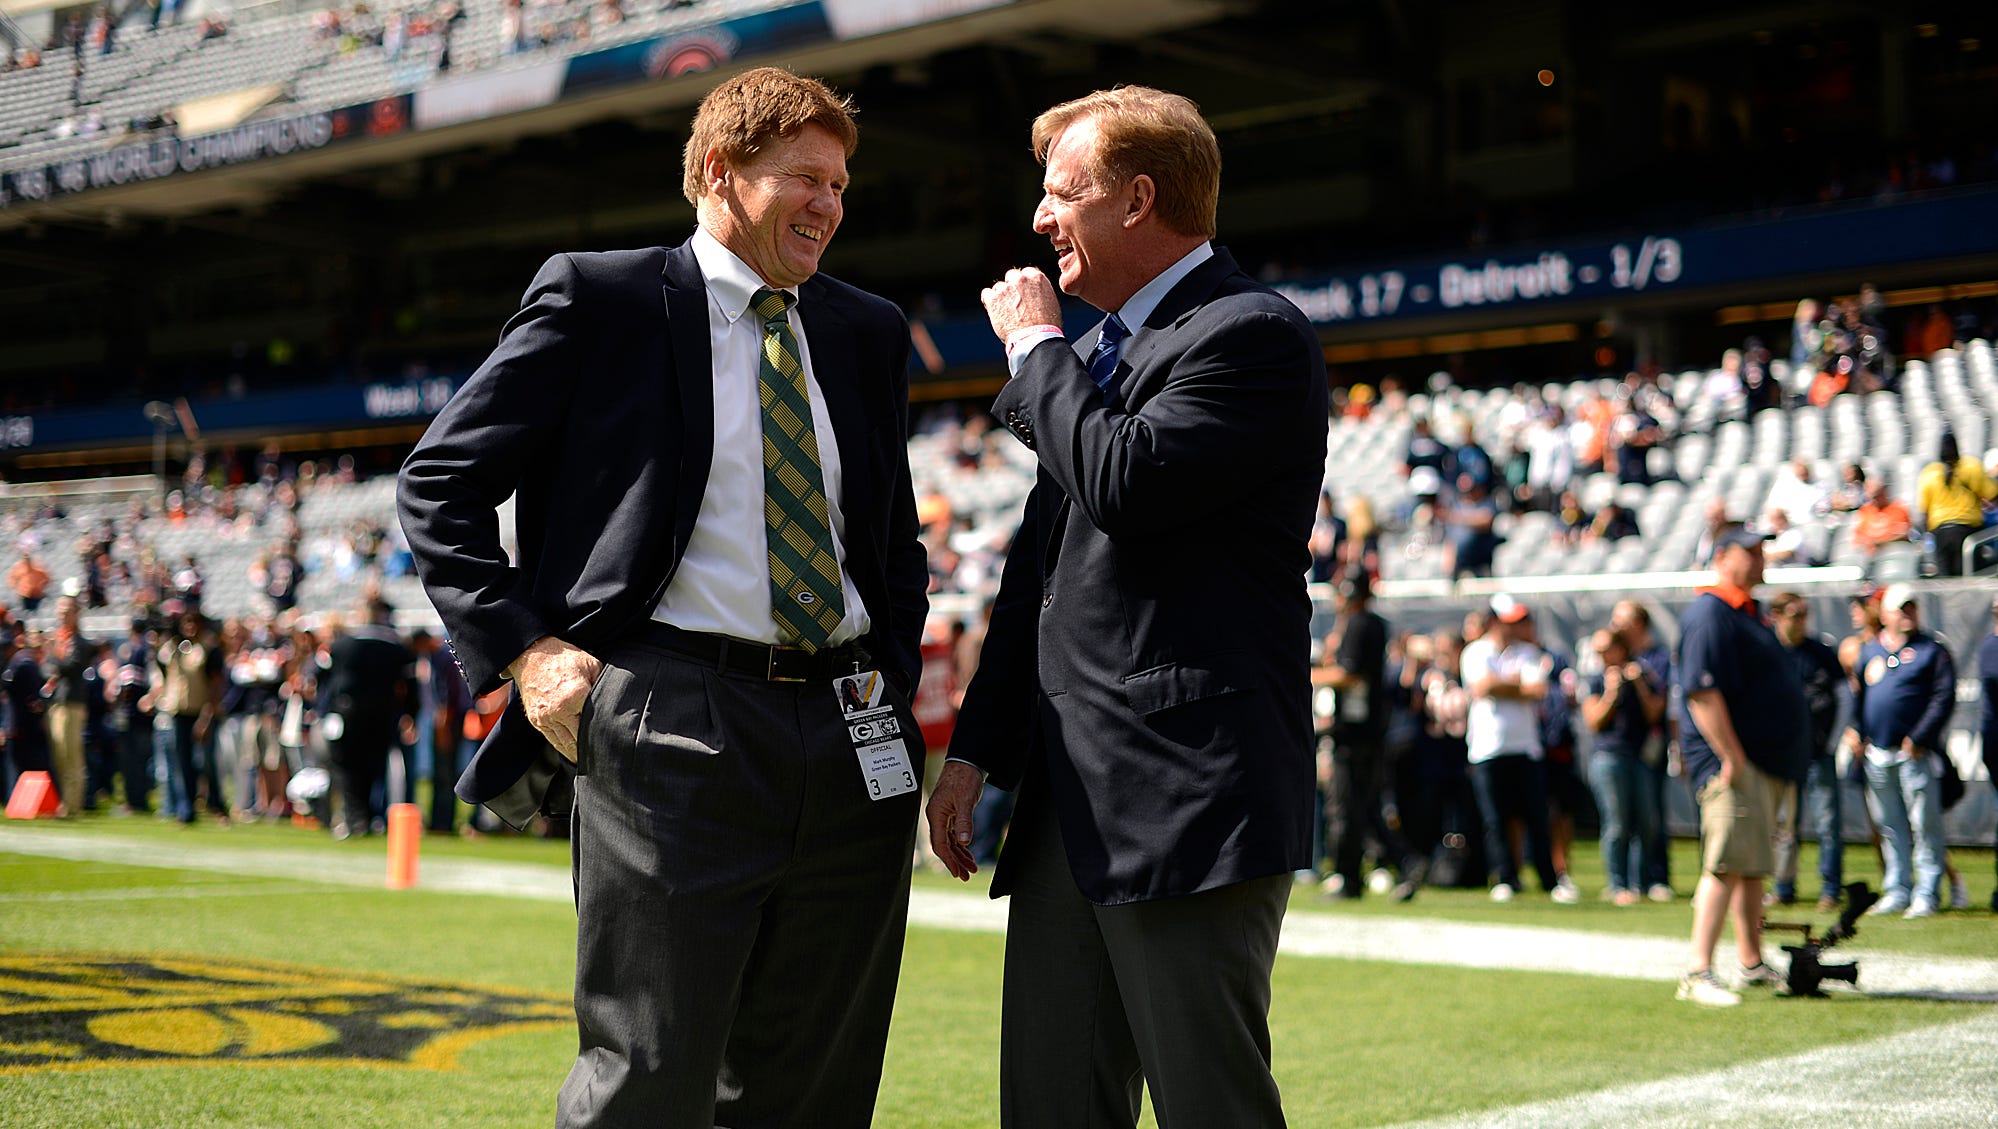 Green Bay Packers president Mark Murphy shares a laugh with NFL commissioner Roger Goodell before their Week 1 game at Soldier Field in Chicago.